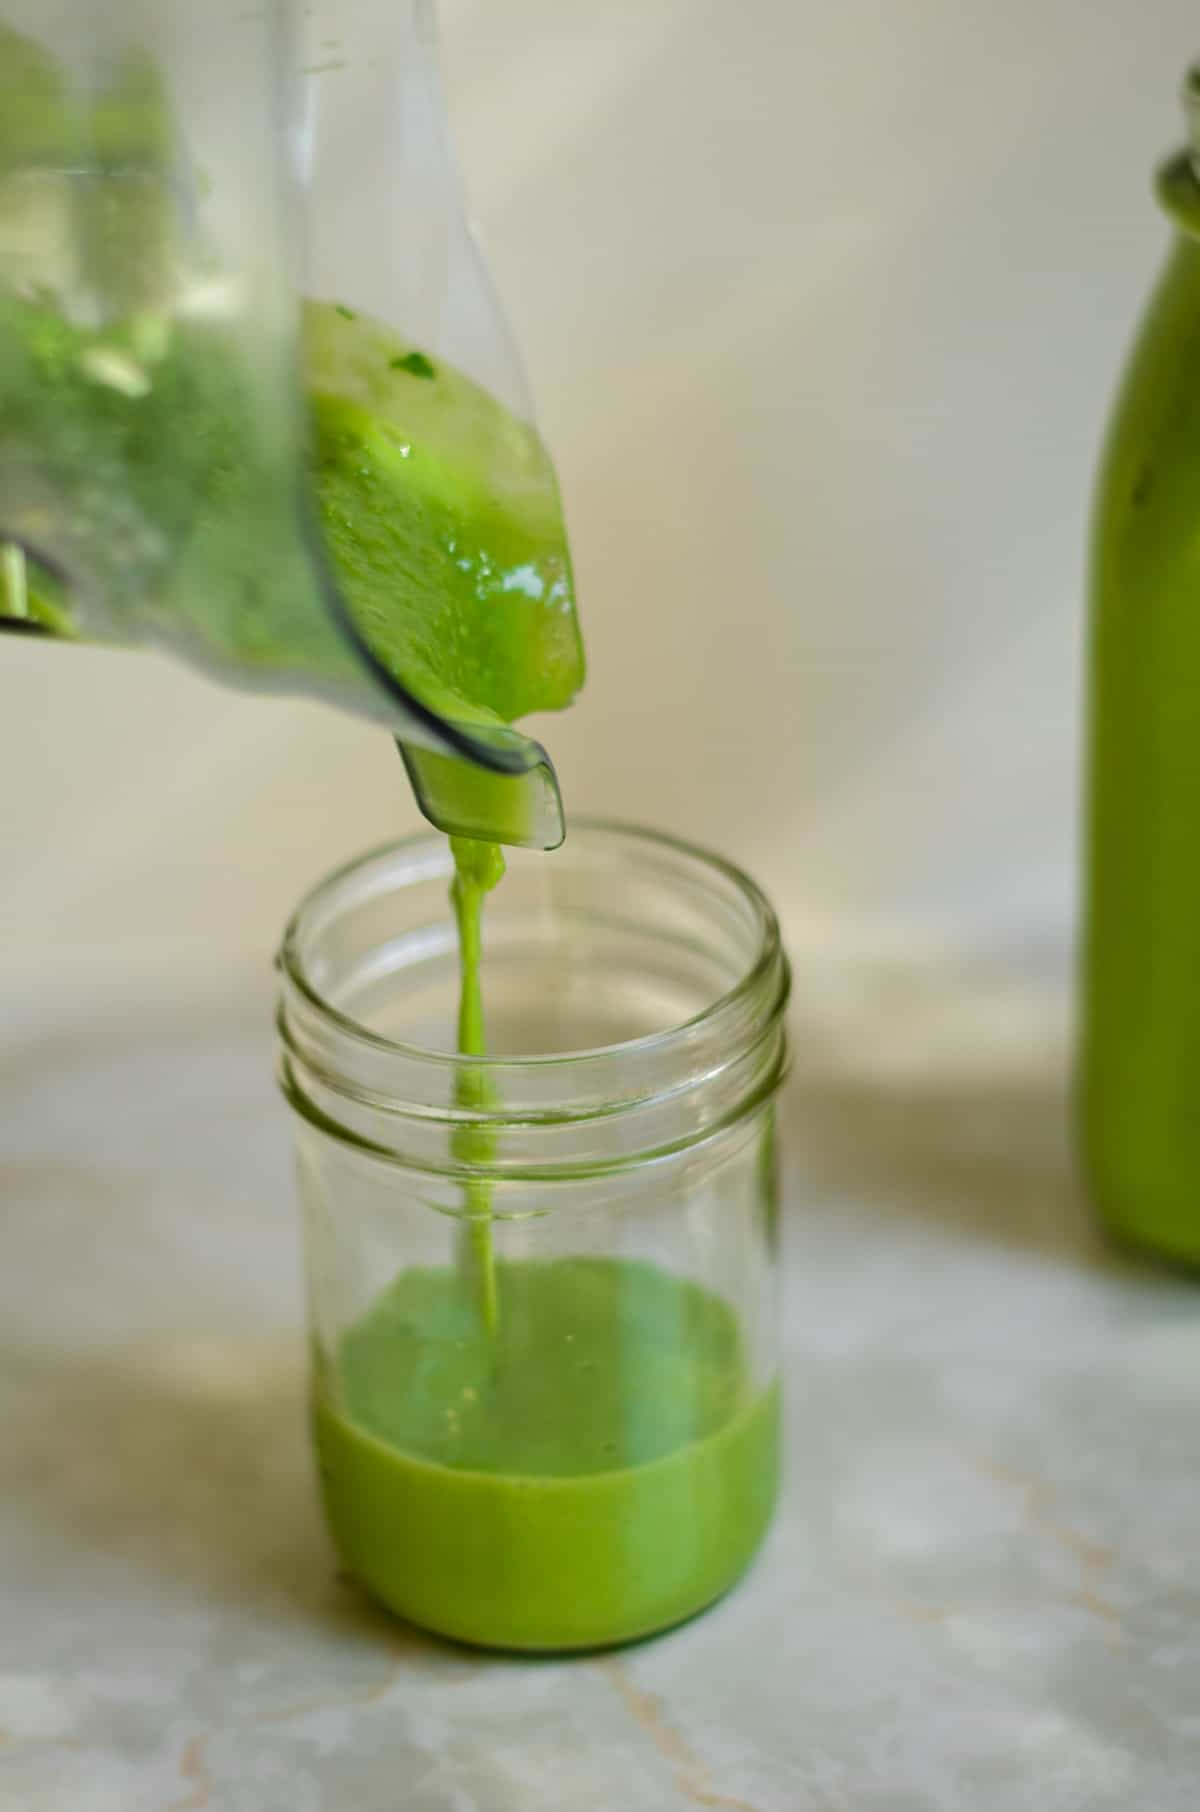 Pouring green smoothie from the vitamix blender into the smoothie cup.